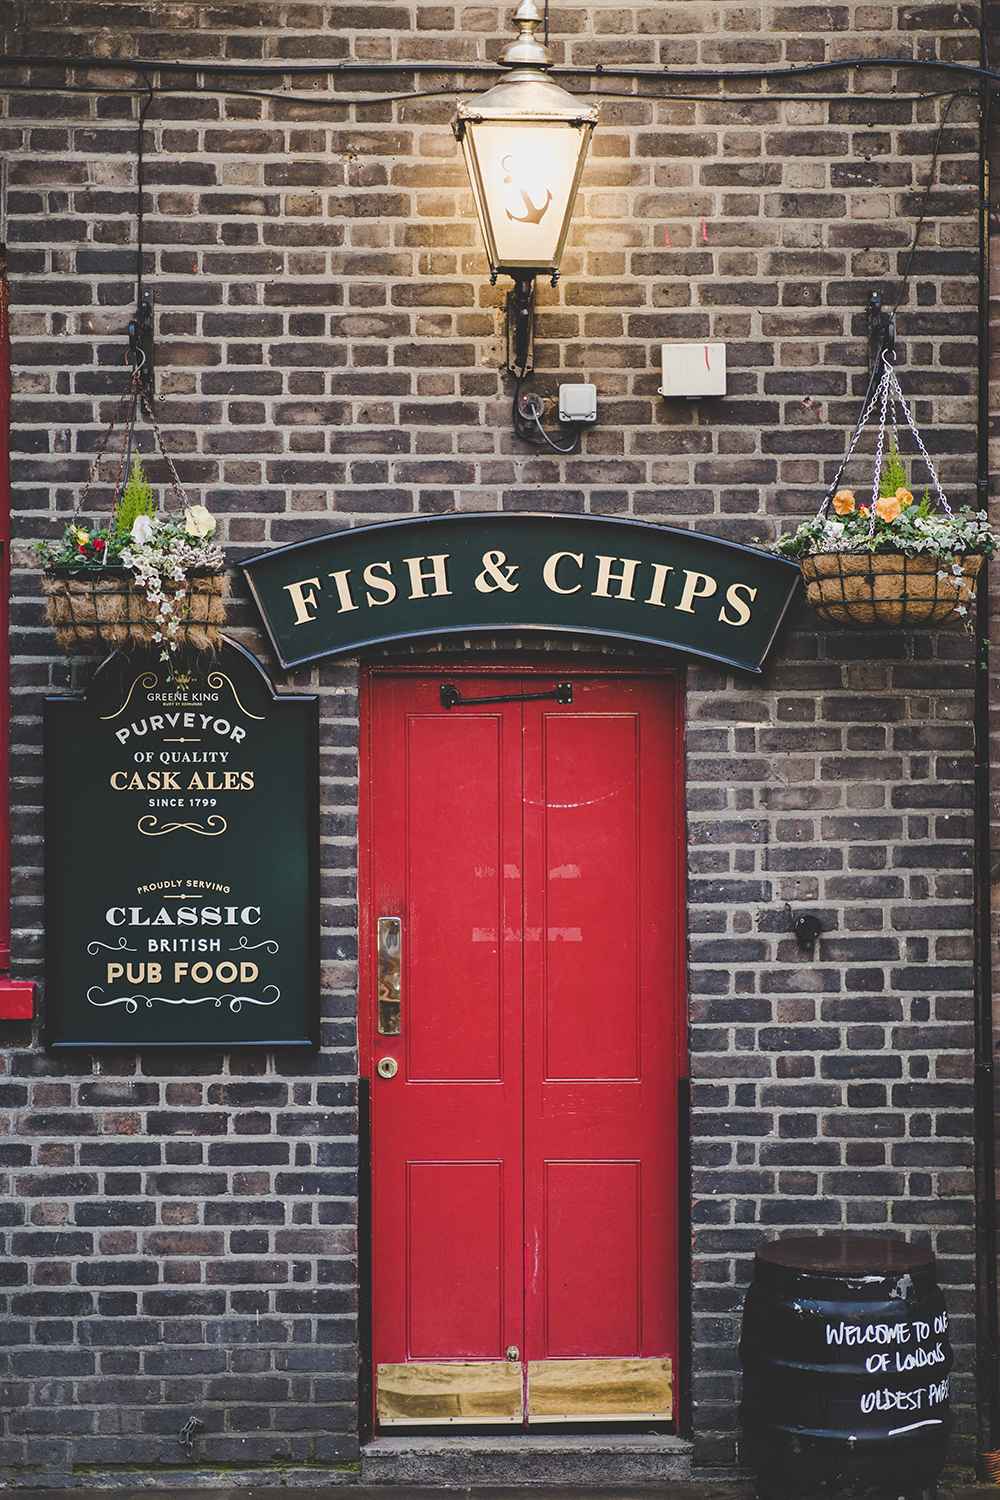 Fish and Chips fascia signage